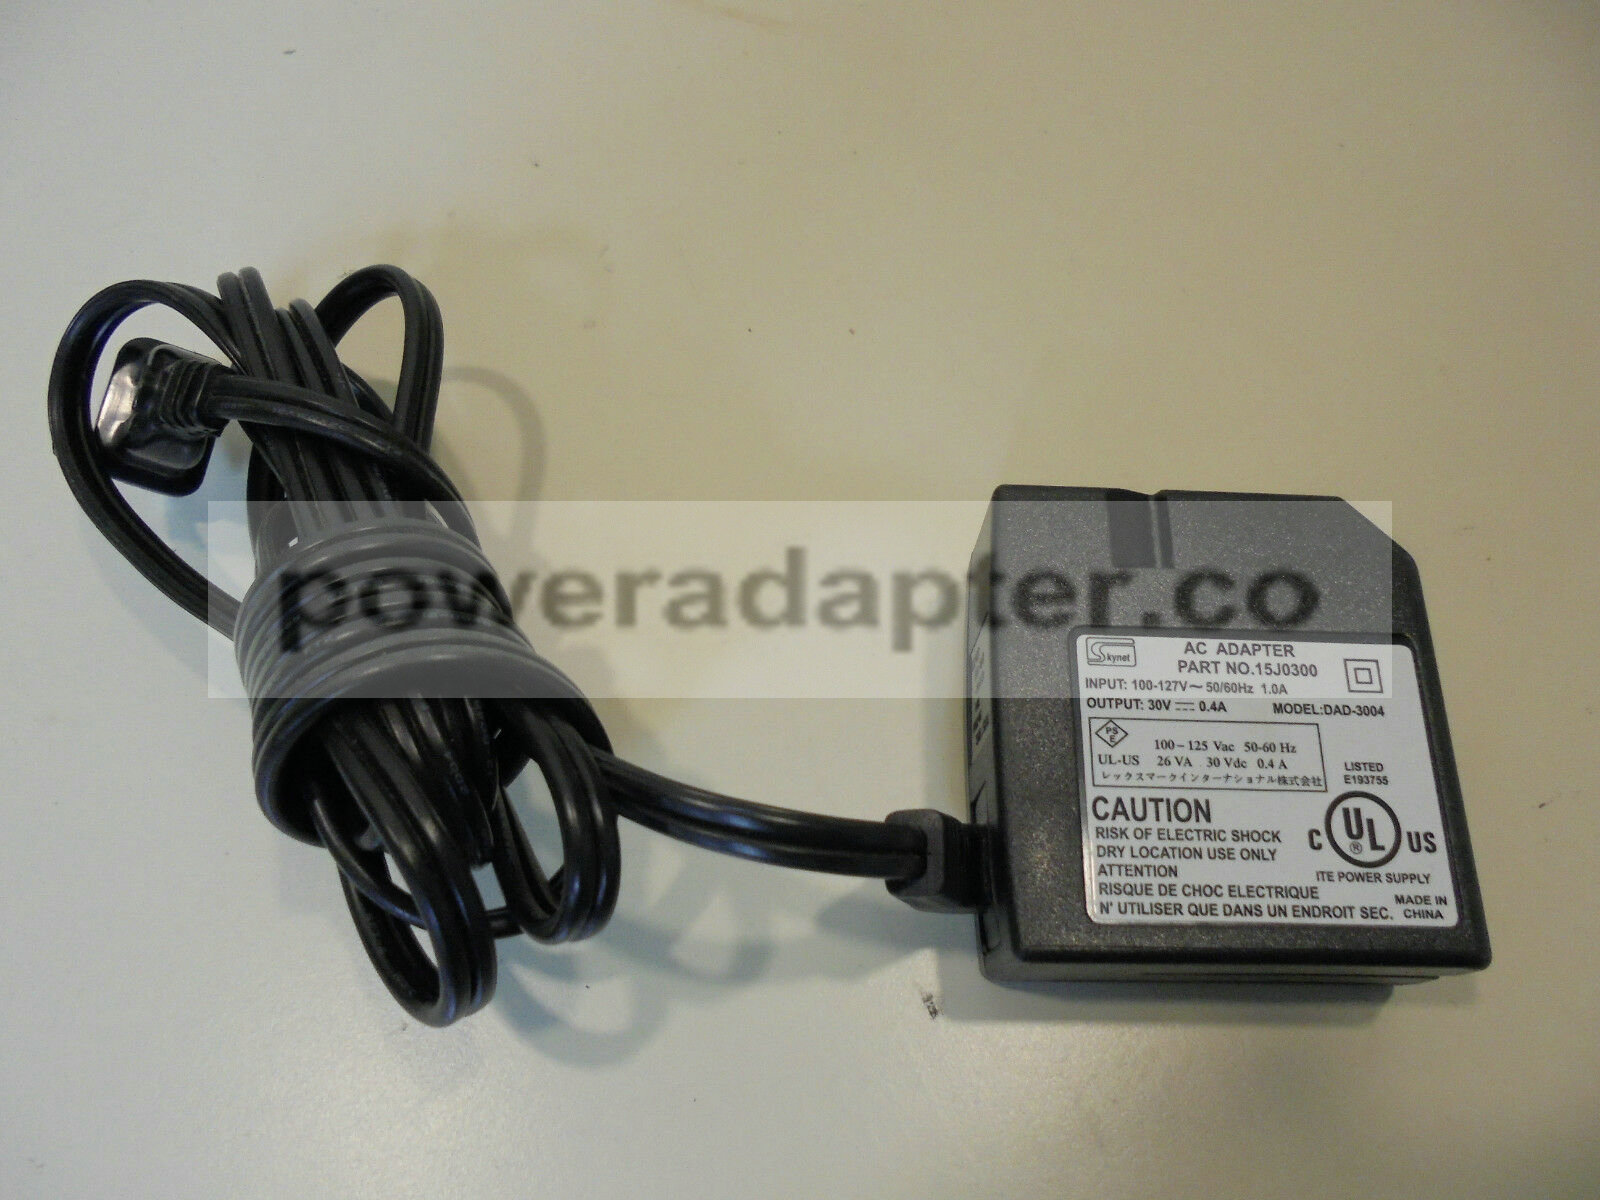 Skynet 15J0300 LEXMARK DELL - Printer AC Power Supply Adapter Cord - DAD-3004 Condition: new MFG: Skynet Compatible - Click Image to Close